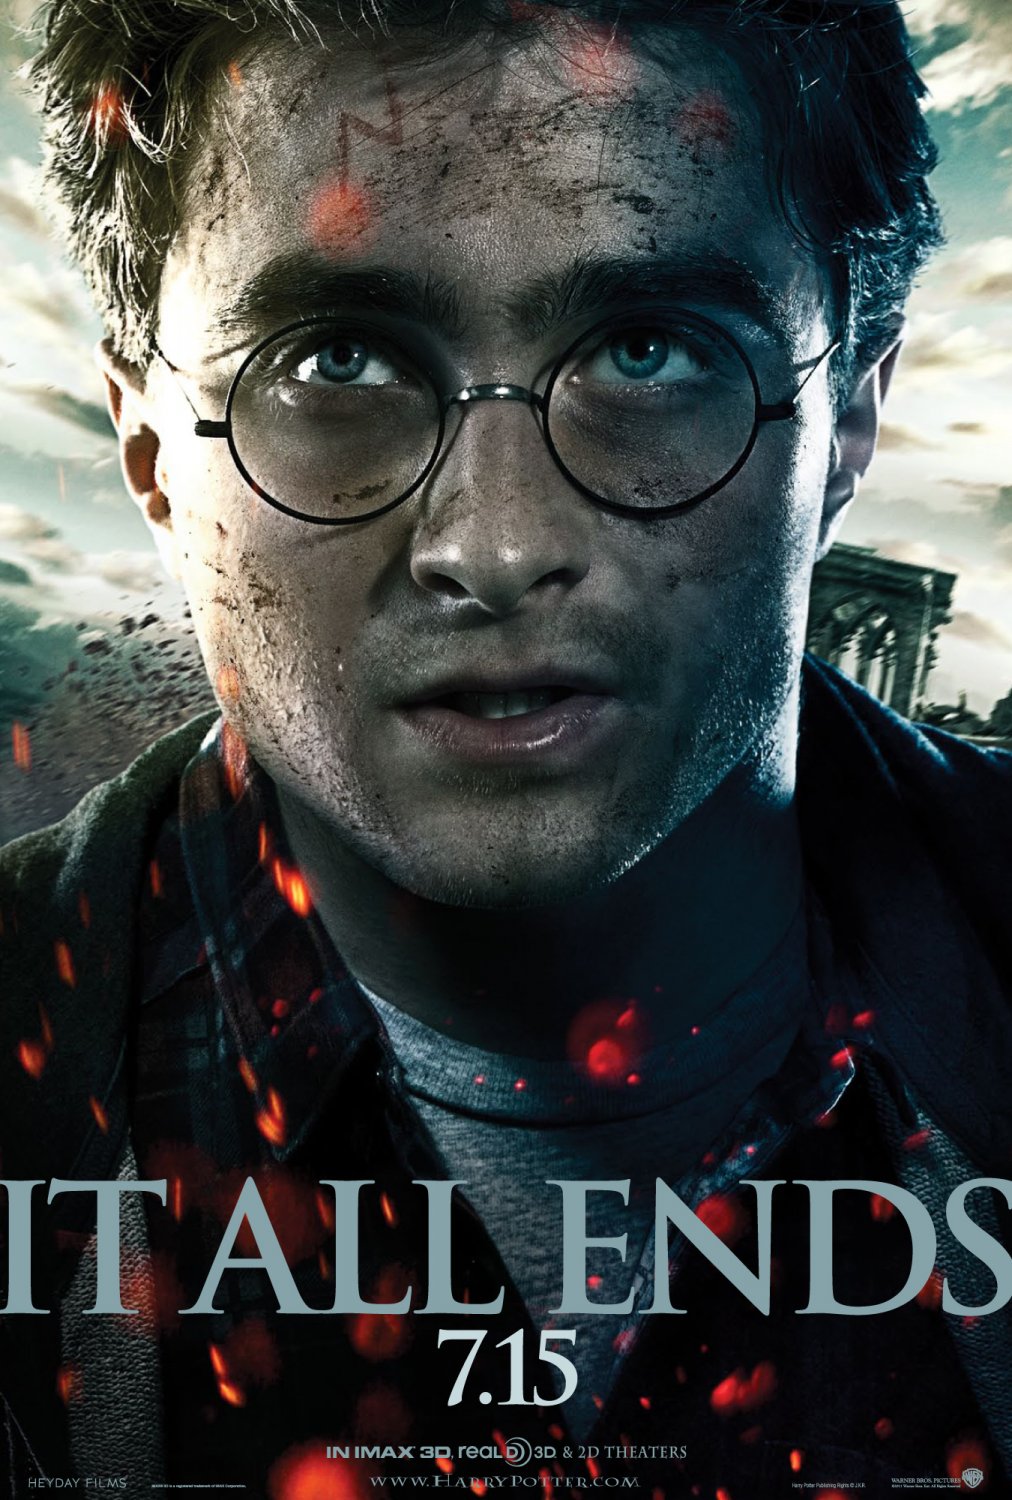 harry potter and the deathly hallows part 2 movie download